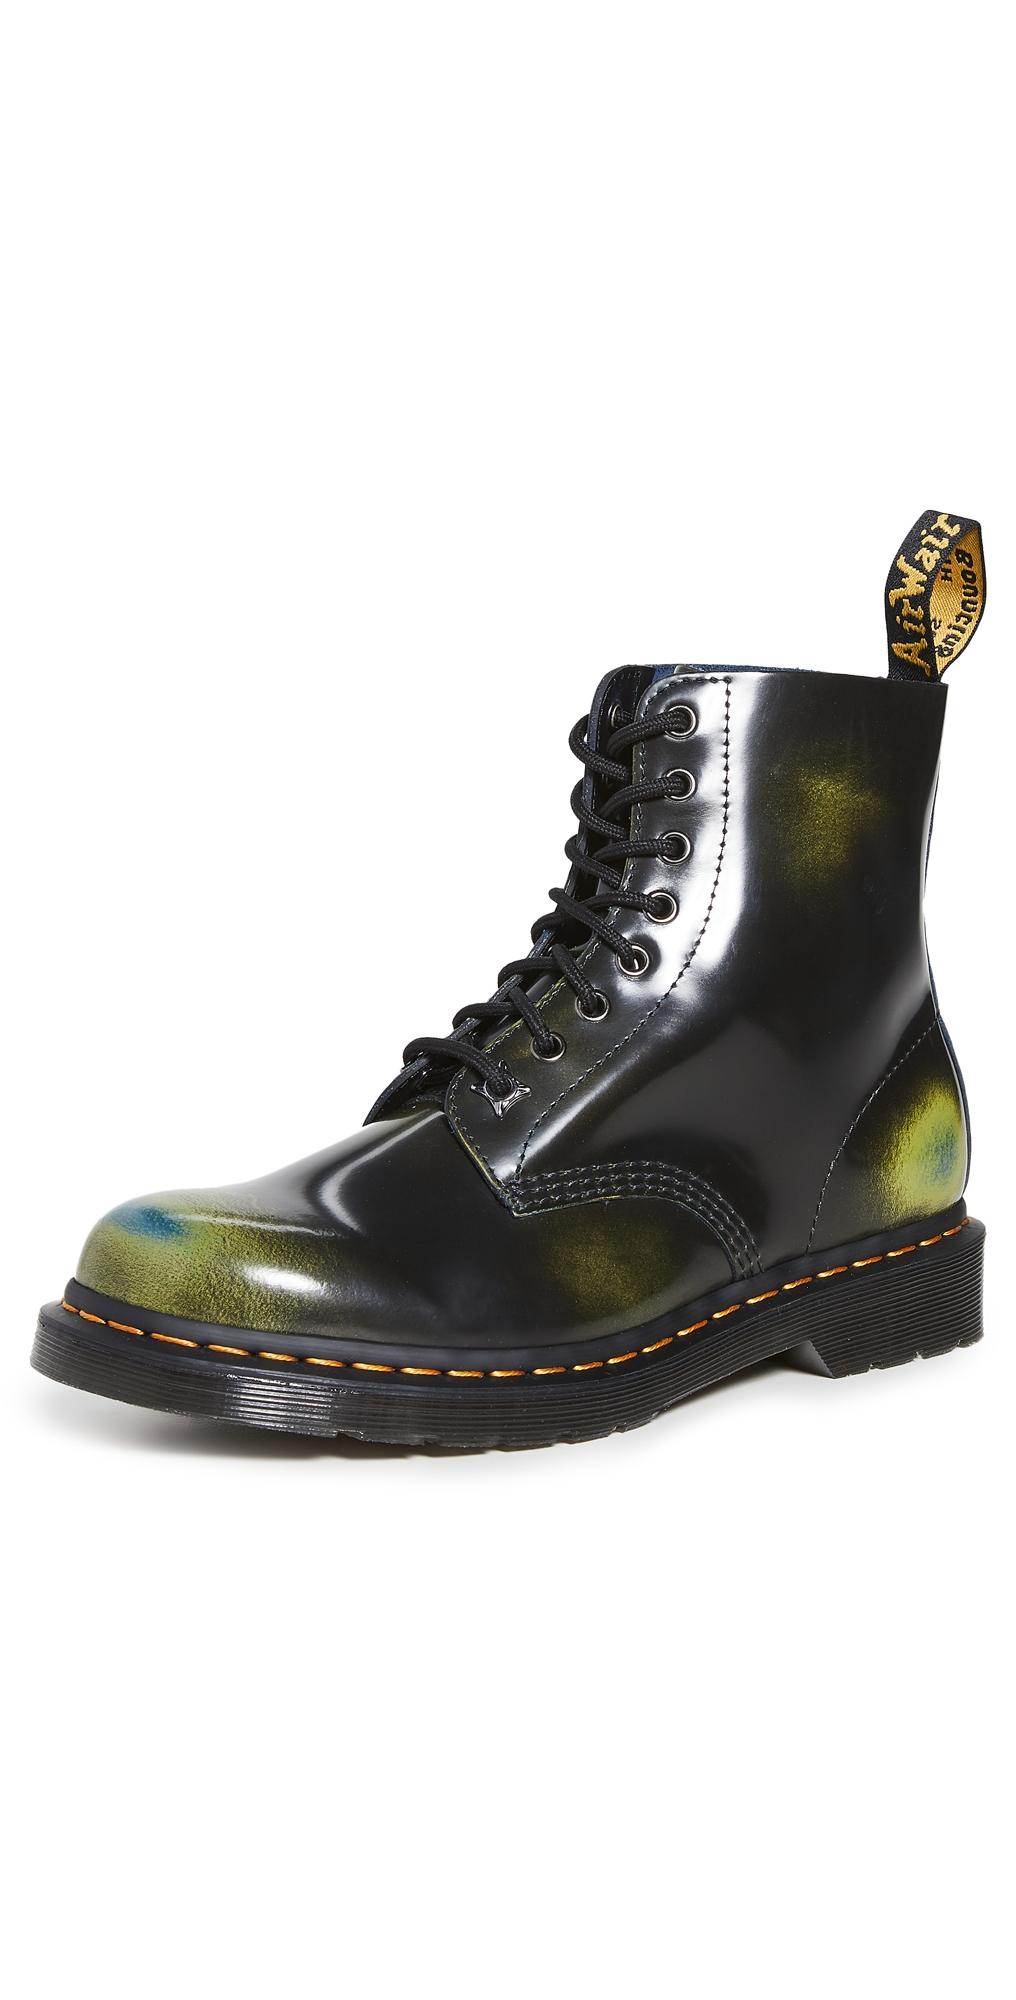 Dr. Martens Leather 1460 Pascal Multi Arcadia Boots in Black for Men - Lyst